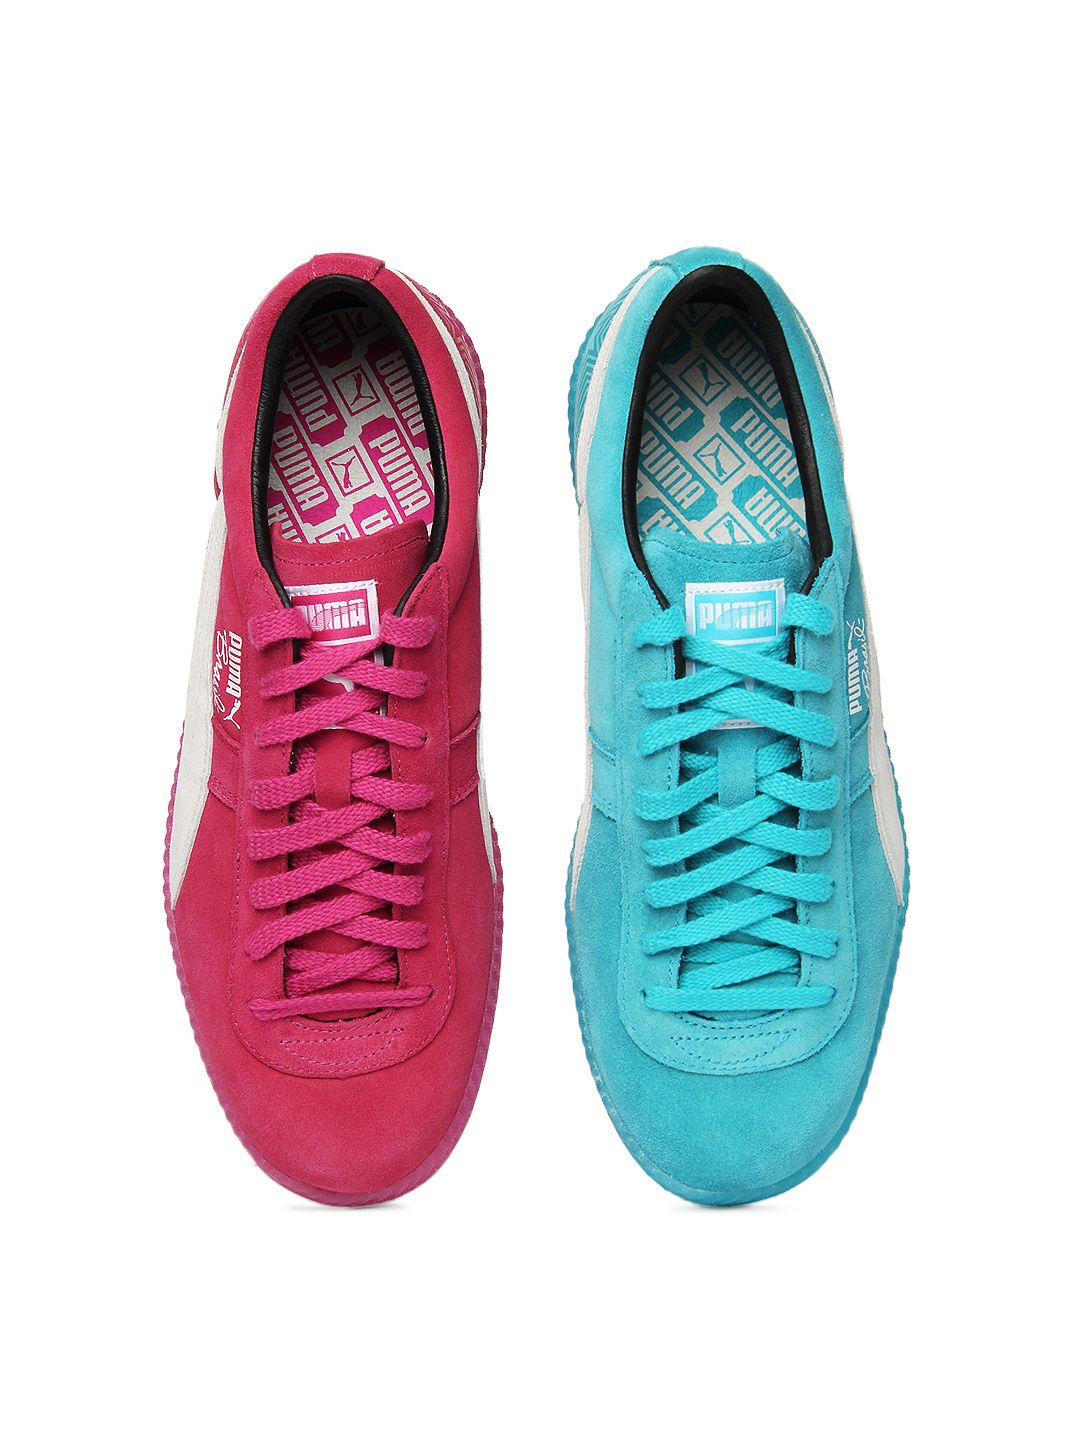 puma suede pink and blue